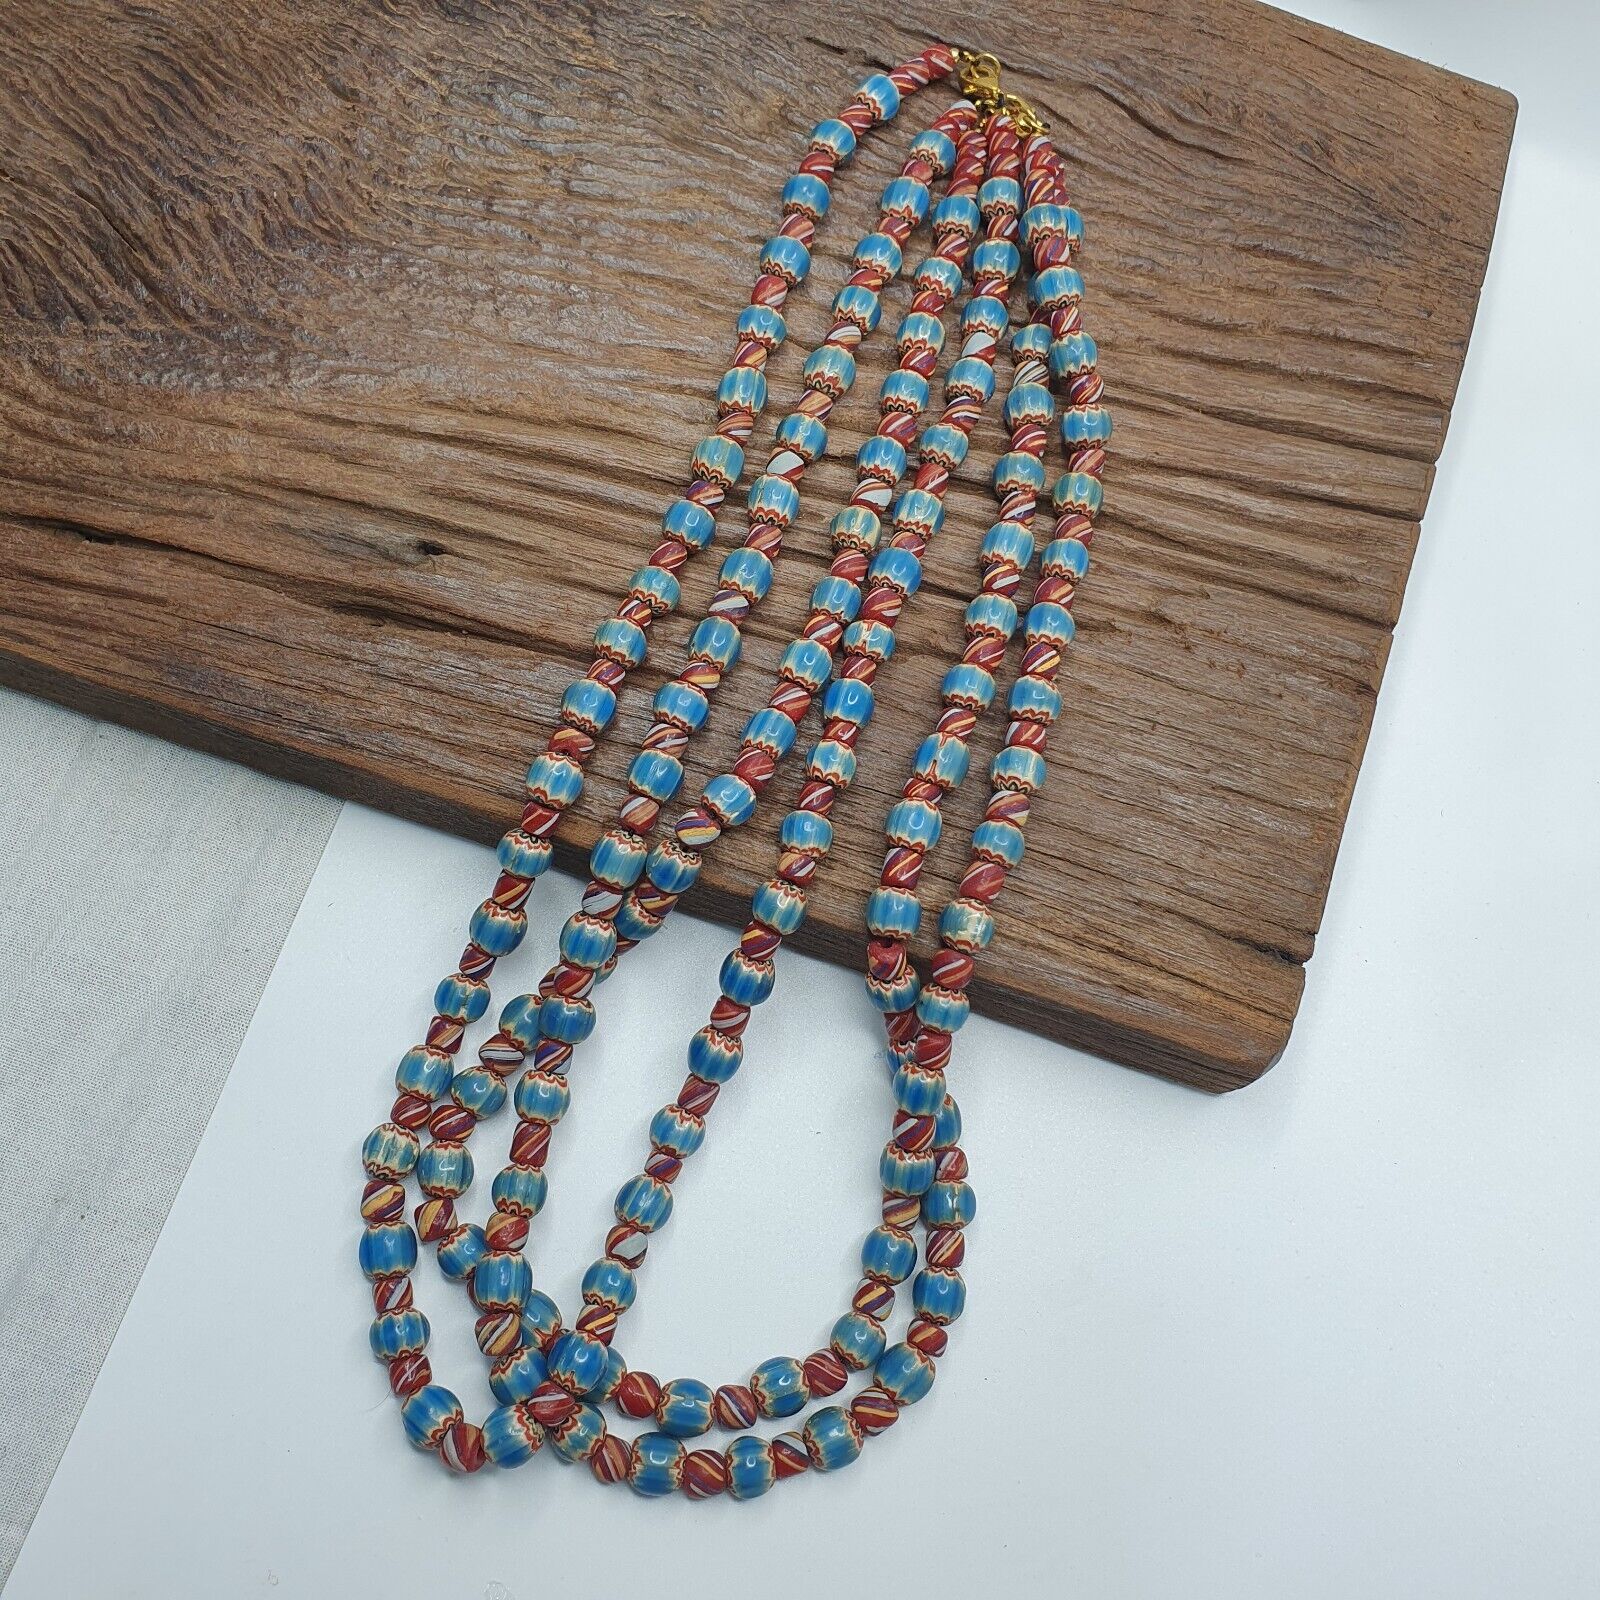 Vintage BLUE Chevron Beads Venetian African Style Beads Long Strand Necklace